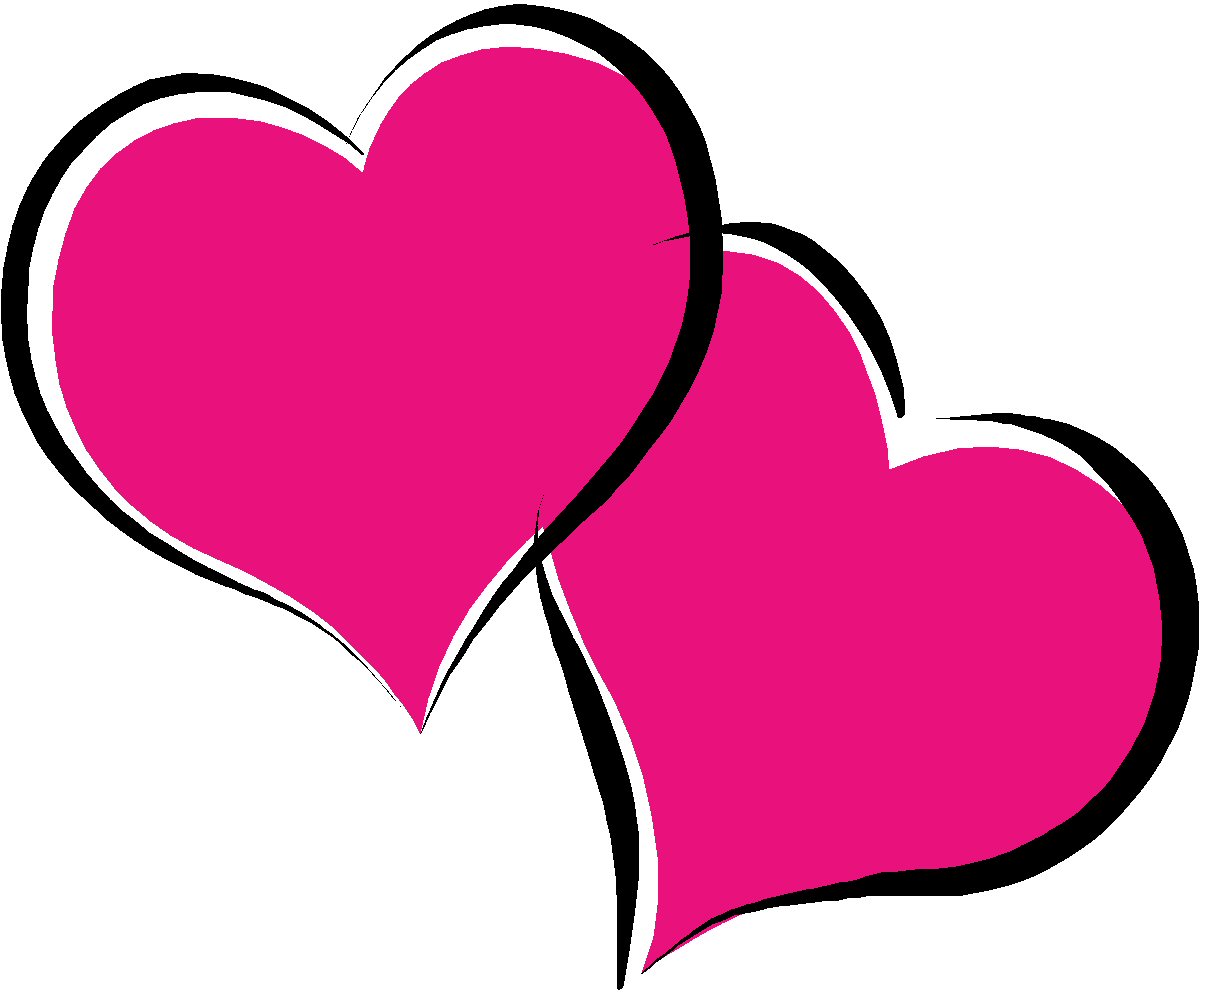 free clipart images of hearts - photo #32